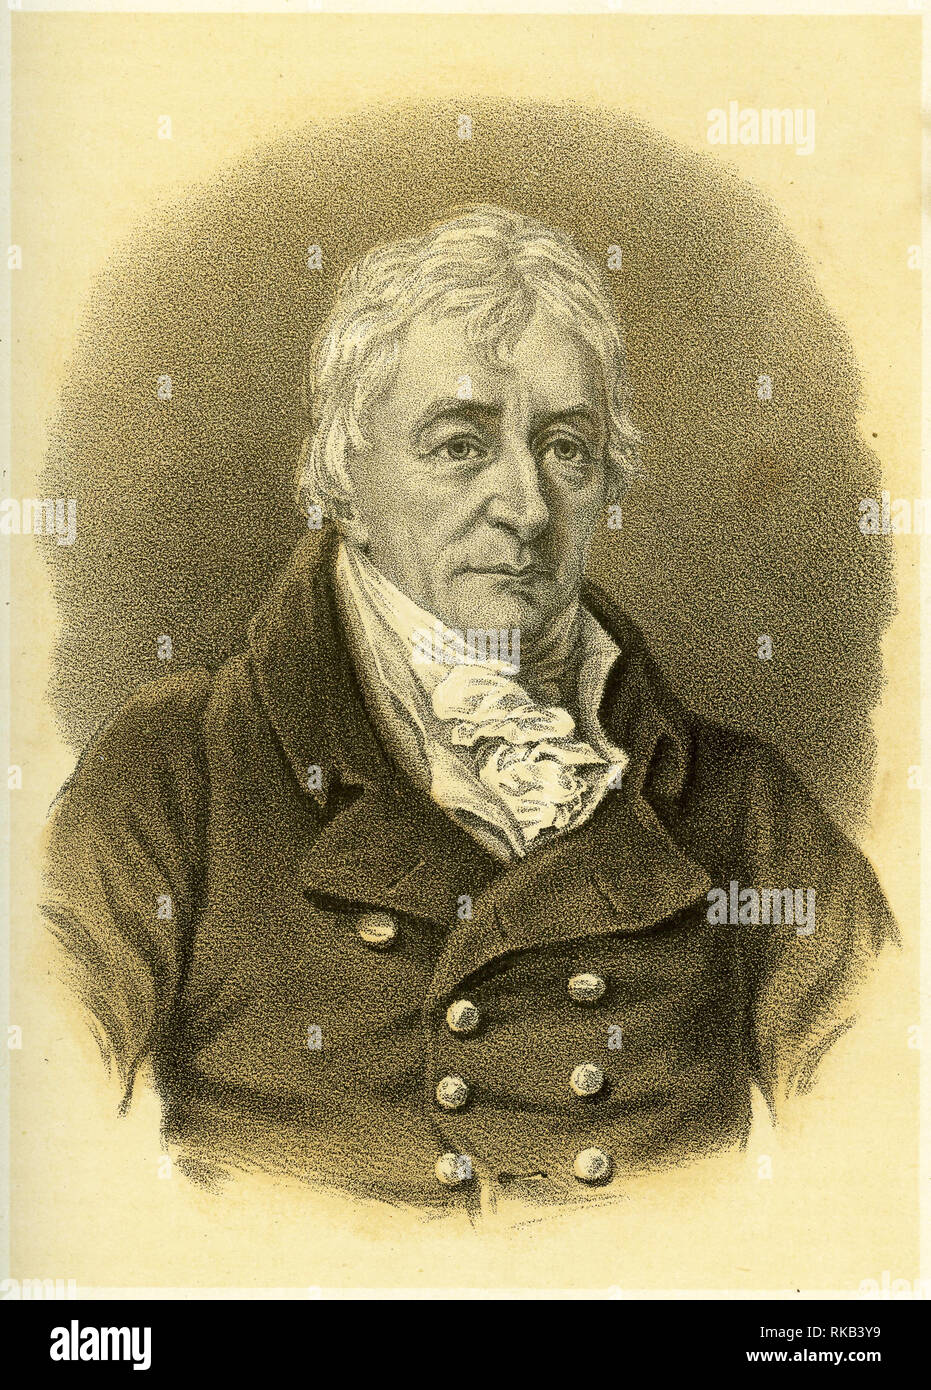 Engraving of Henry Grattan (1746 – 1820) Irish politician and member of the Irish House of Commons, who campaigned for legislative freedom for the Irish Parliament. Stock Photo